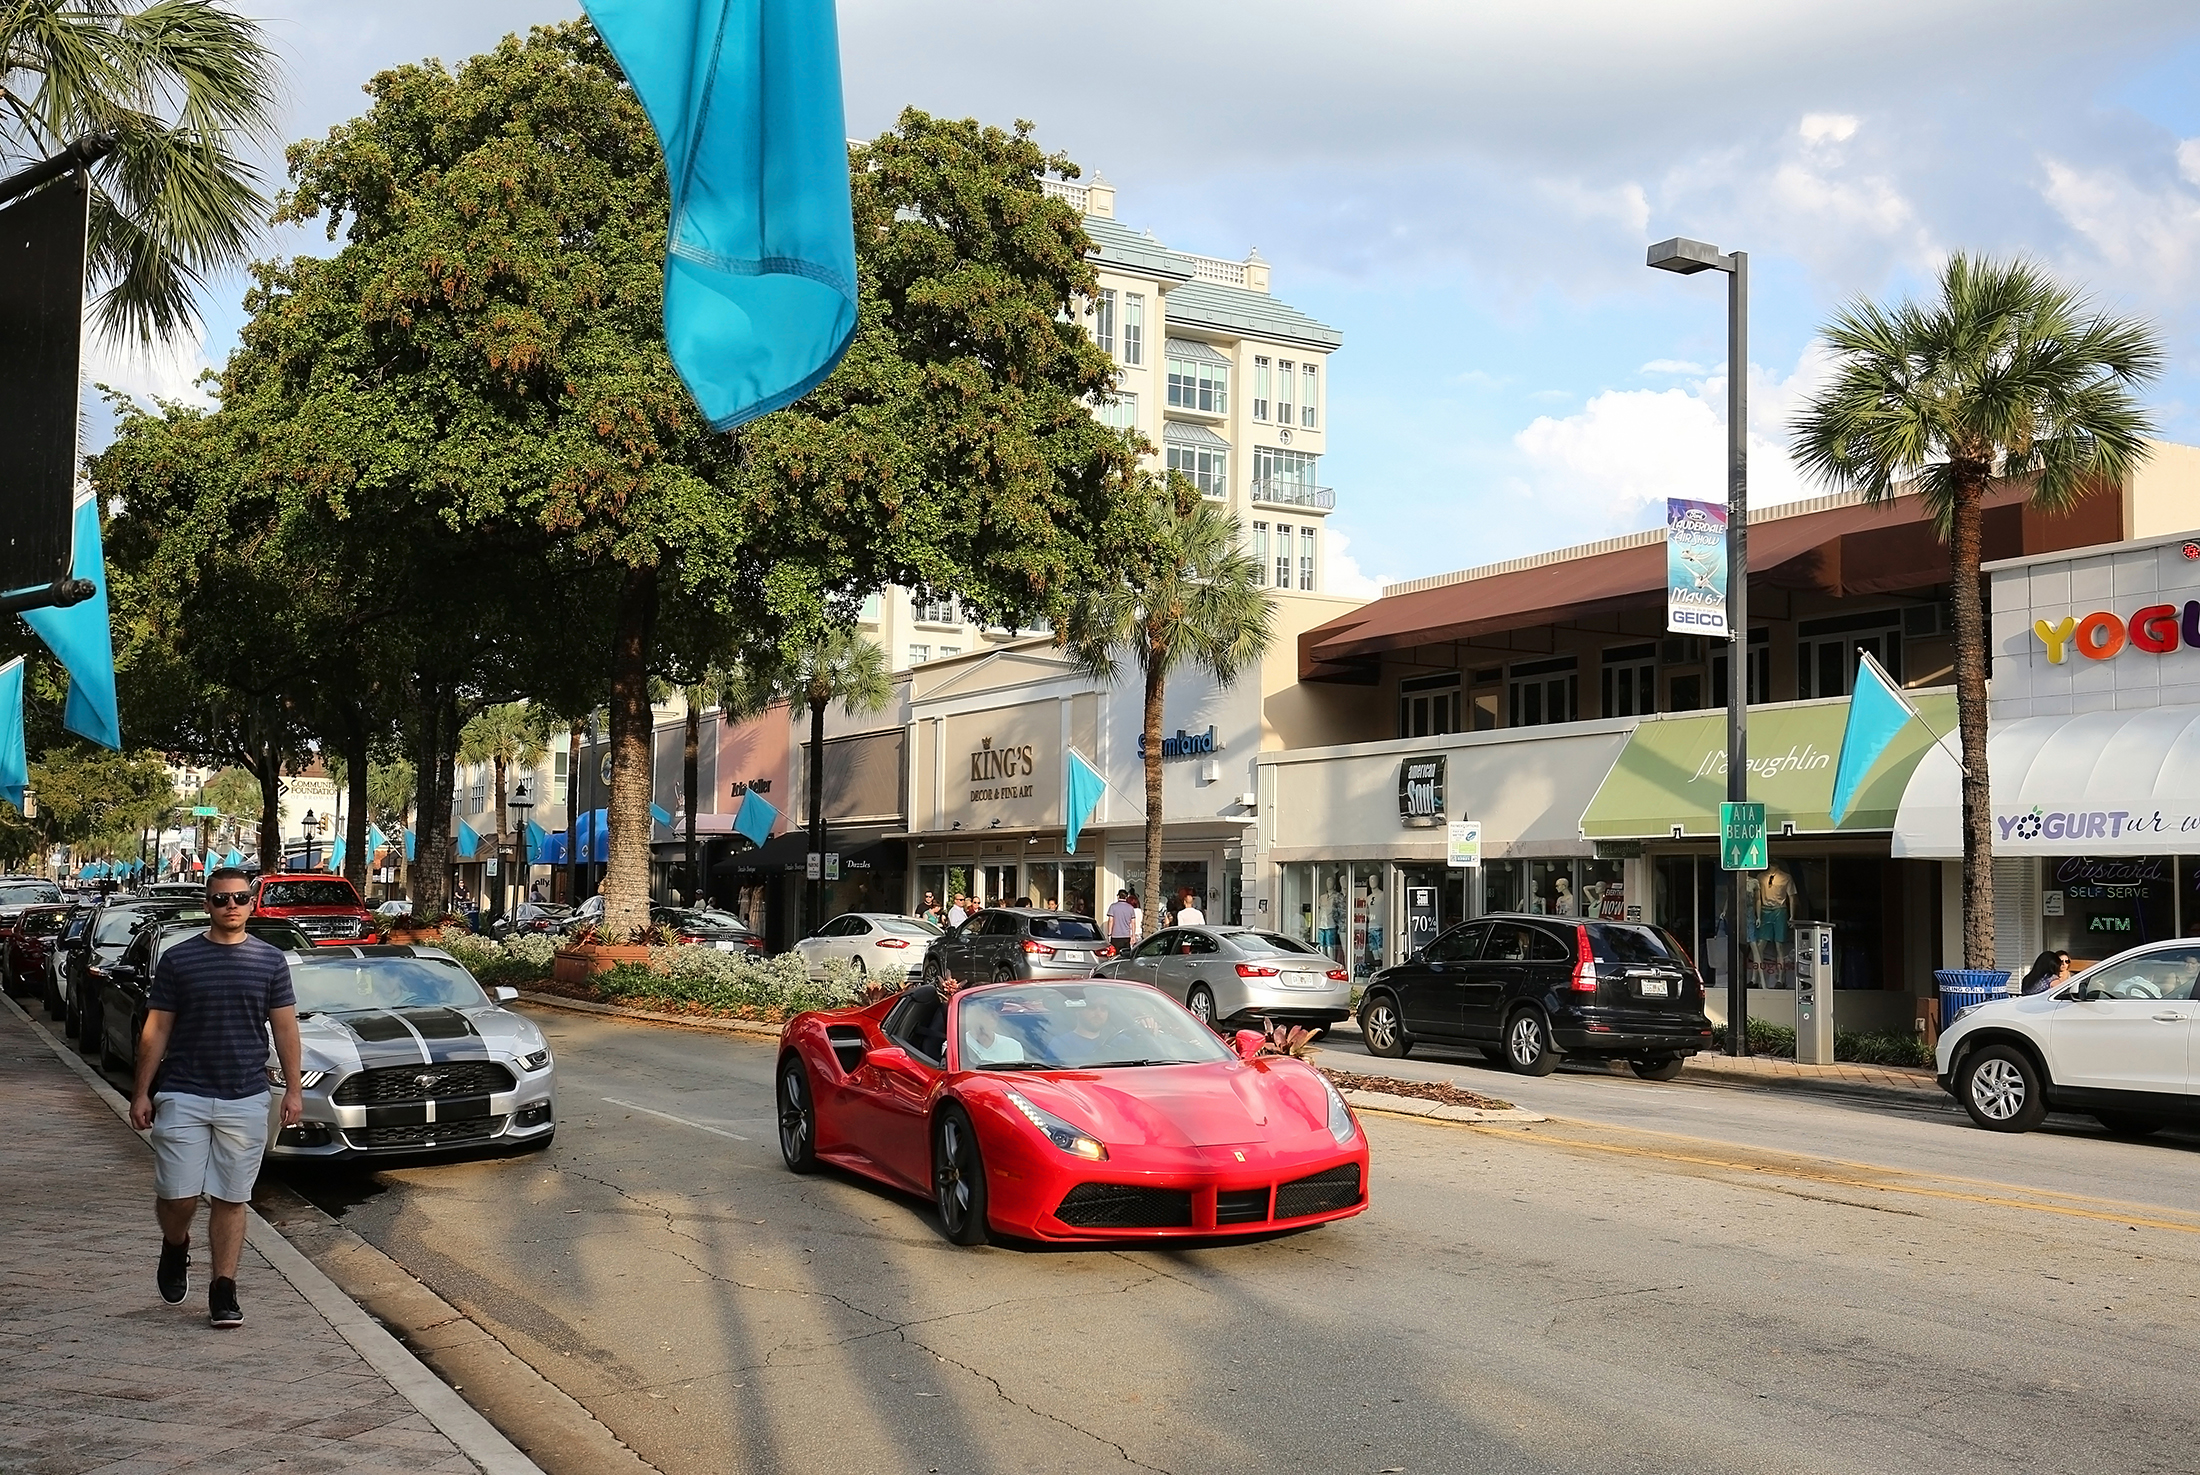 Fort Lauderdale Shopping: A Traveler's Guide